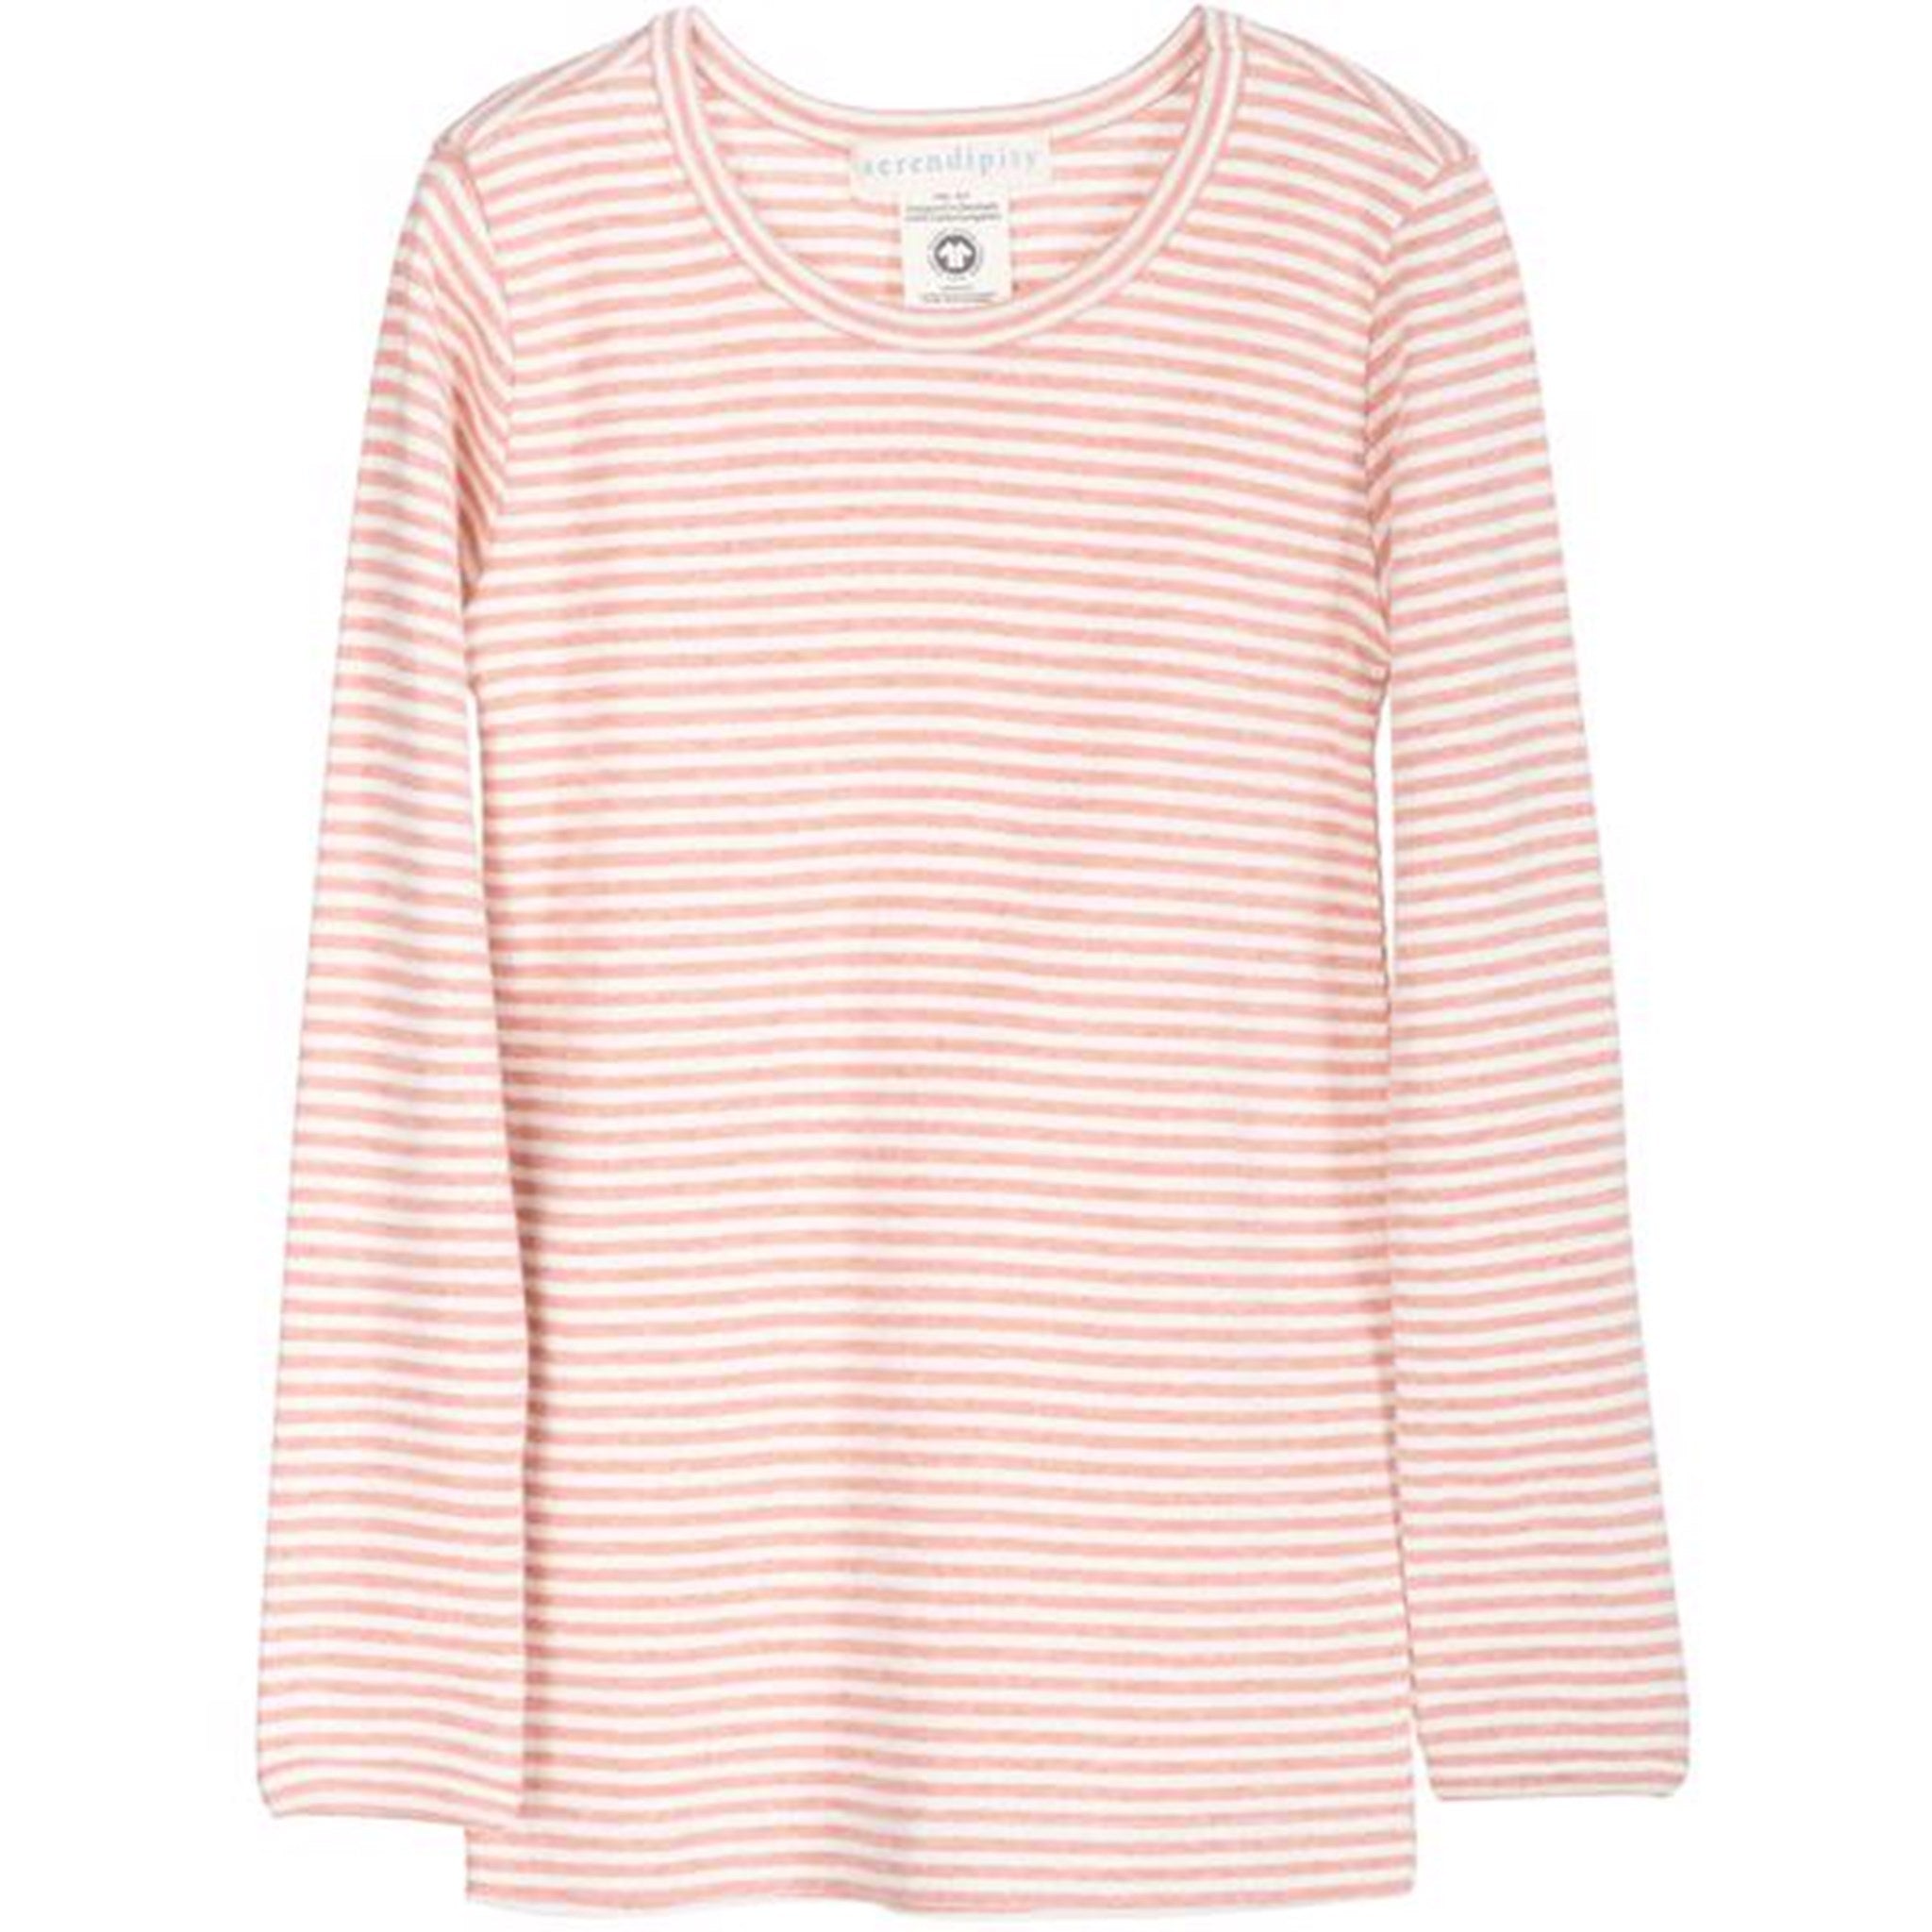 Serendipity Clay/Offwhite Slim Stripe Blouse